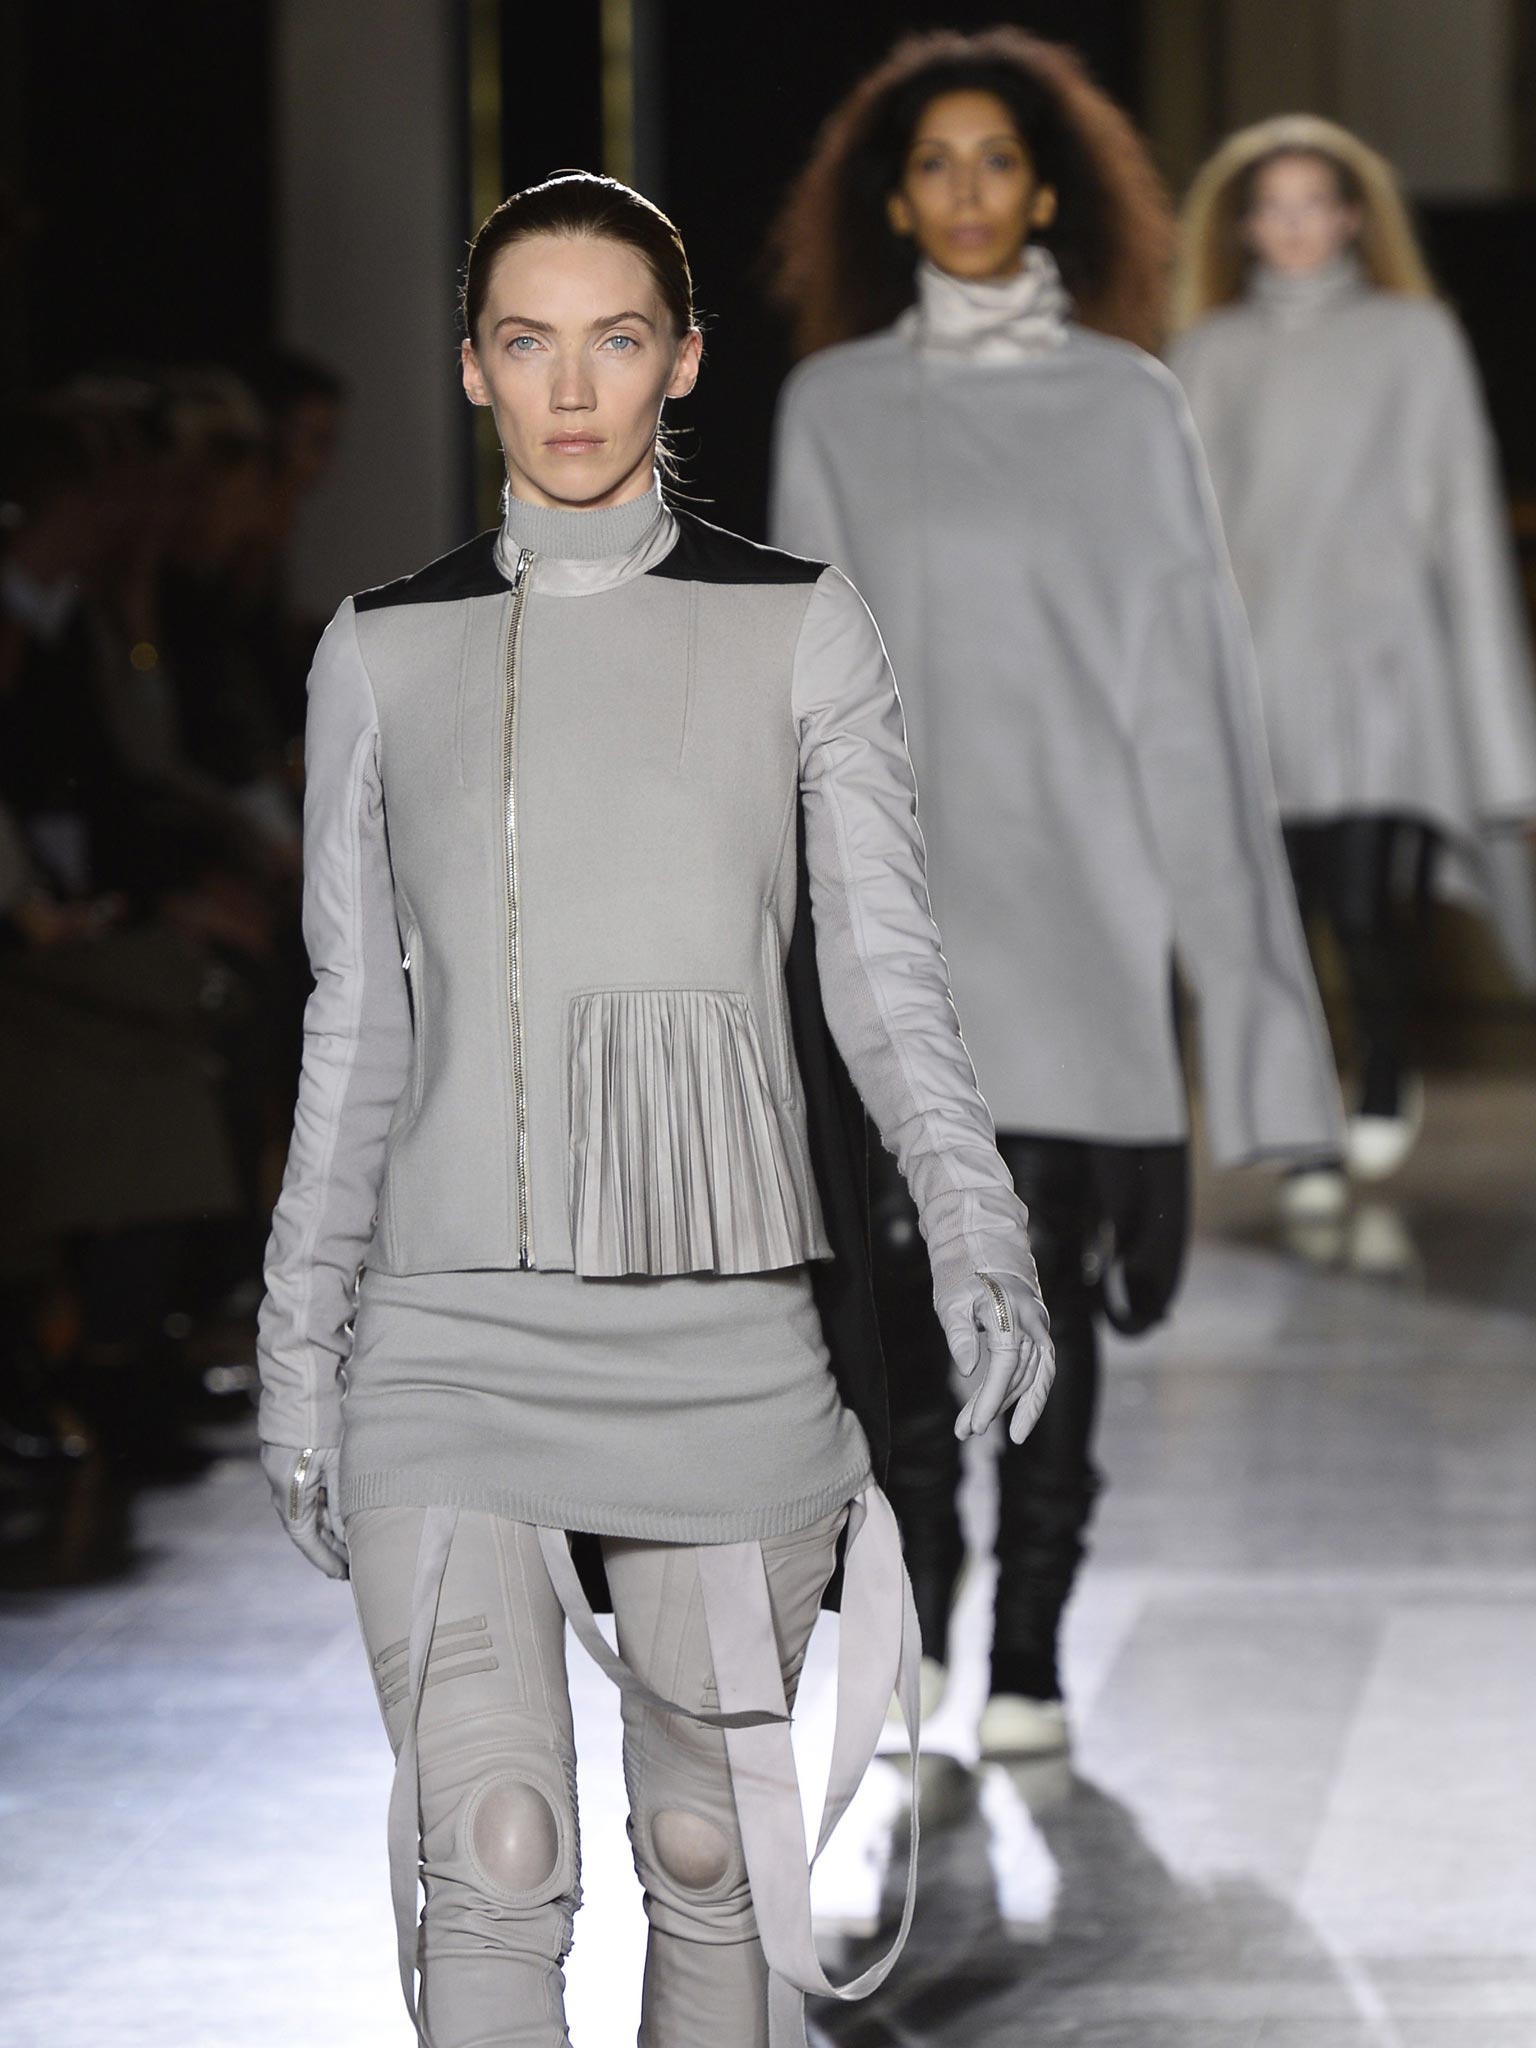 Designer Rick Owens returned to his trademark glamorous grunge – and went heavy on the leather – on the Paris catwalk